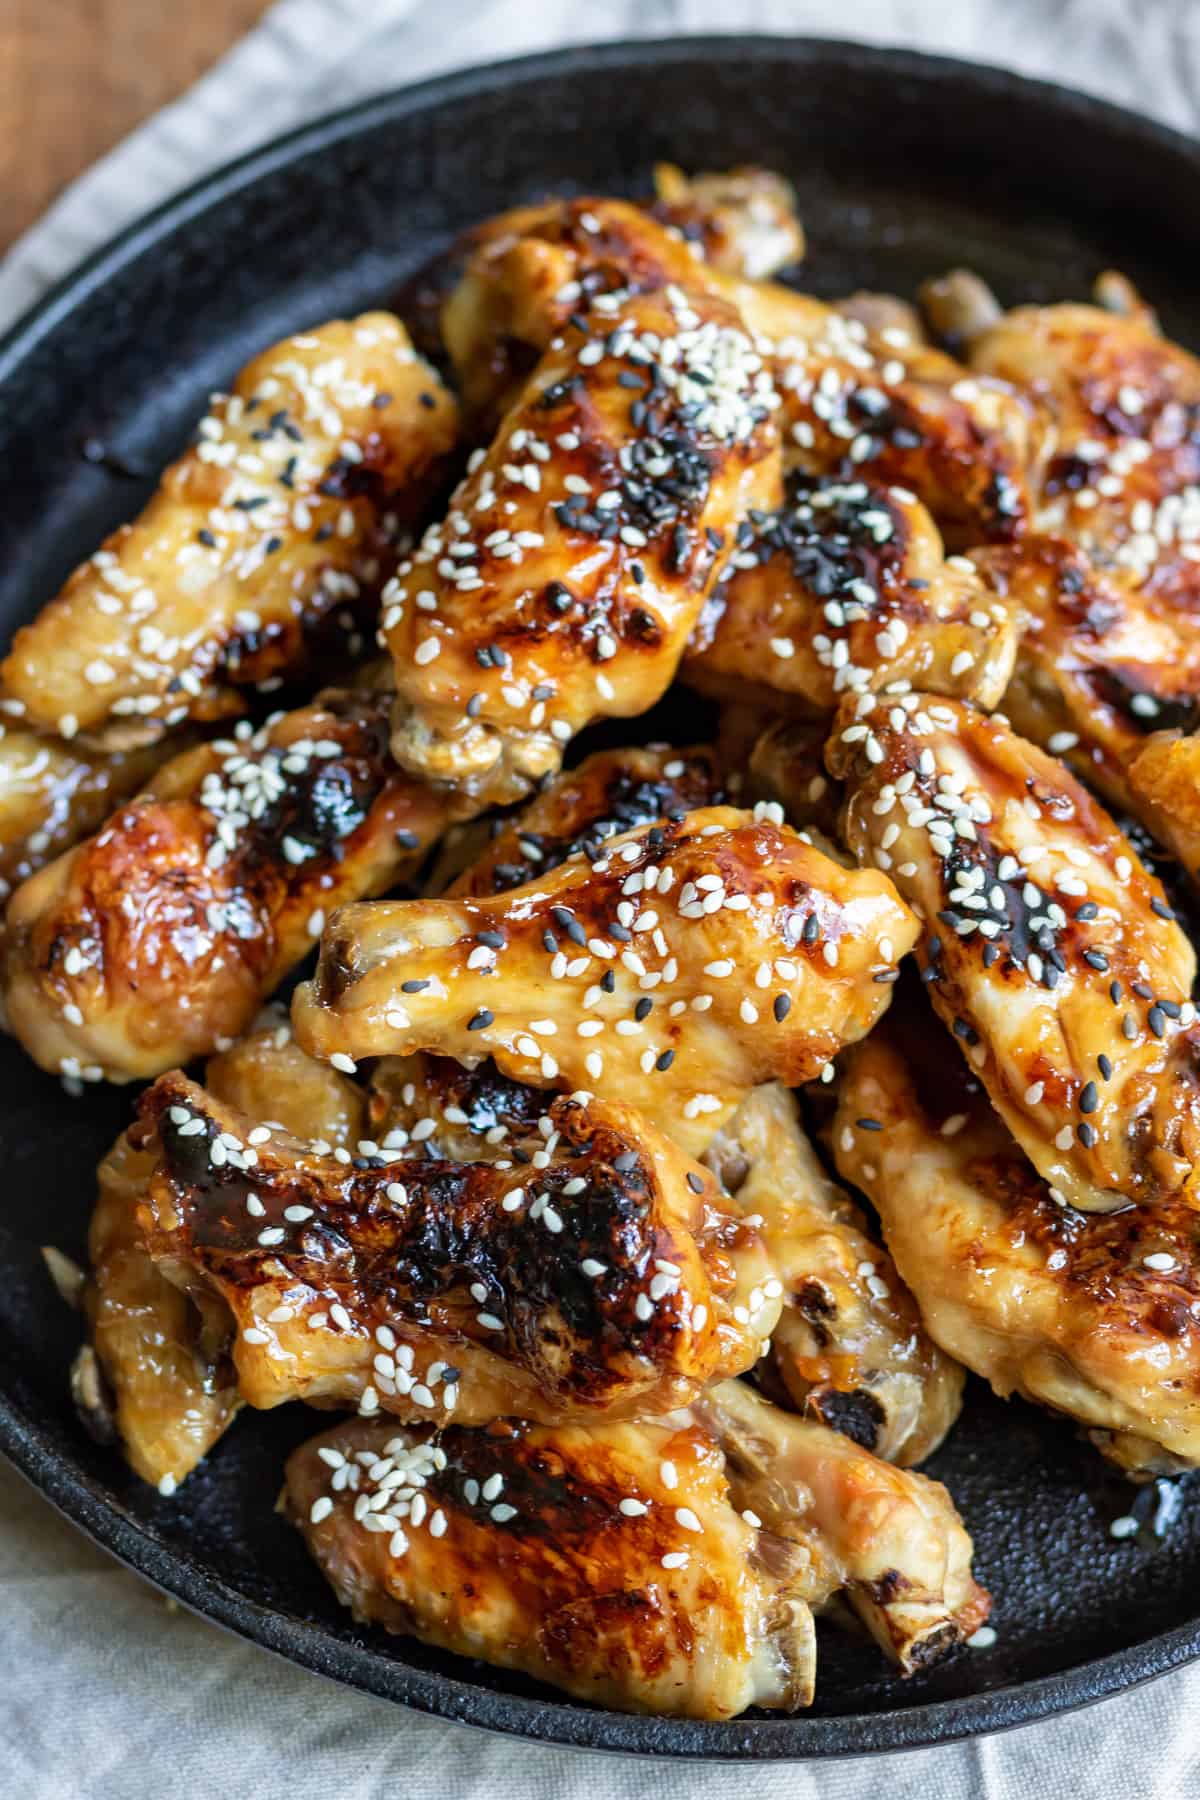 Dish of chicken wings.